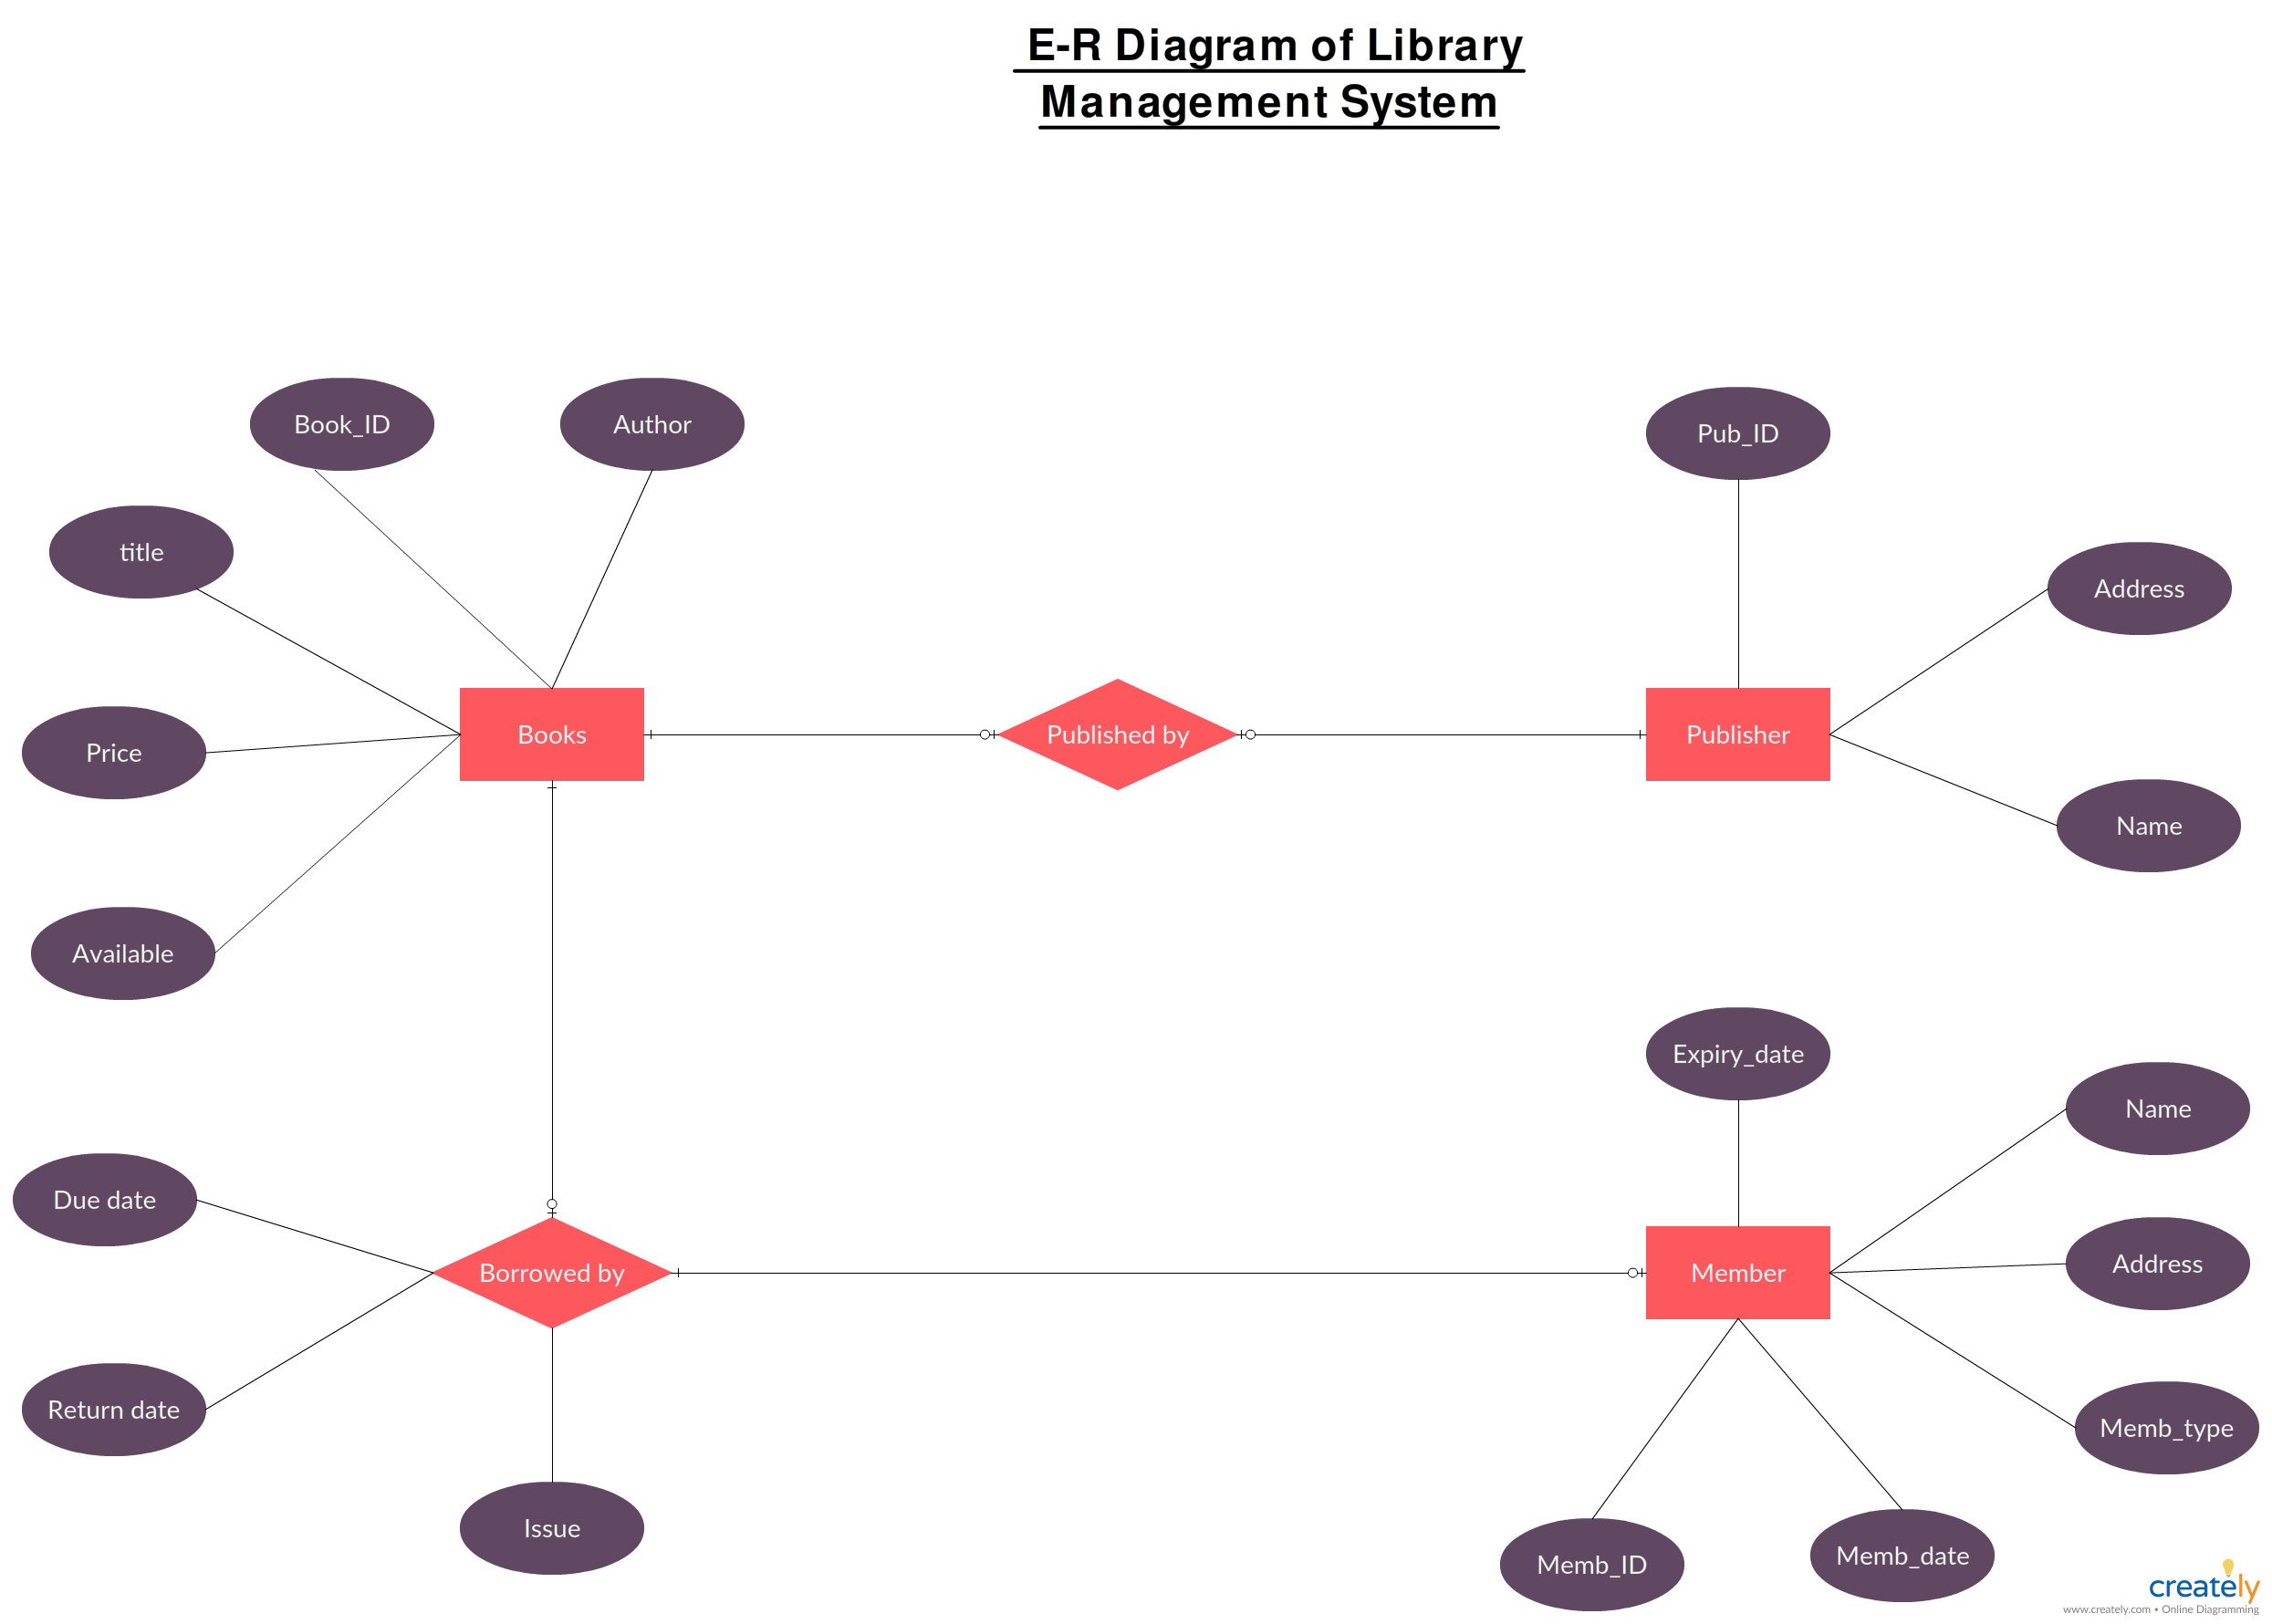 Her Likes This: Property Management System Er Diagram